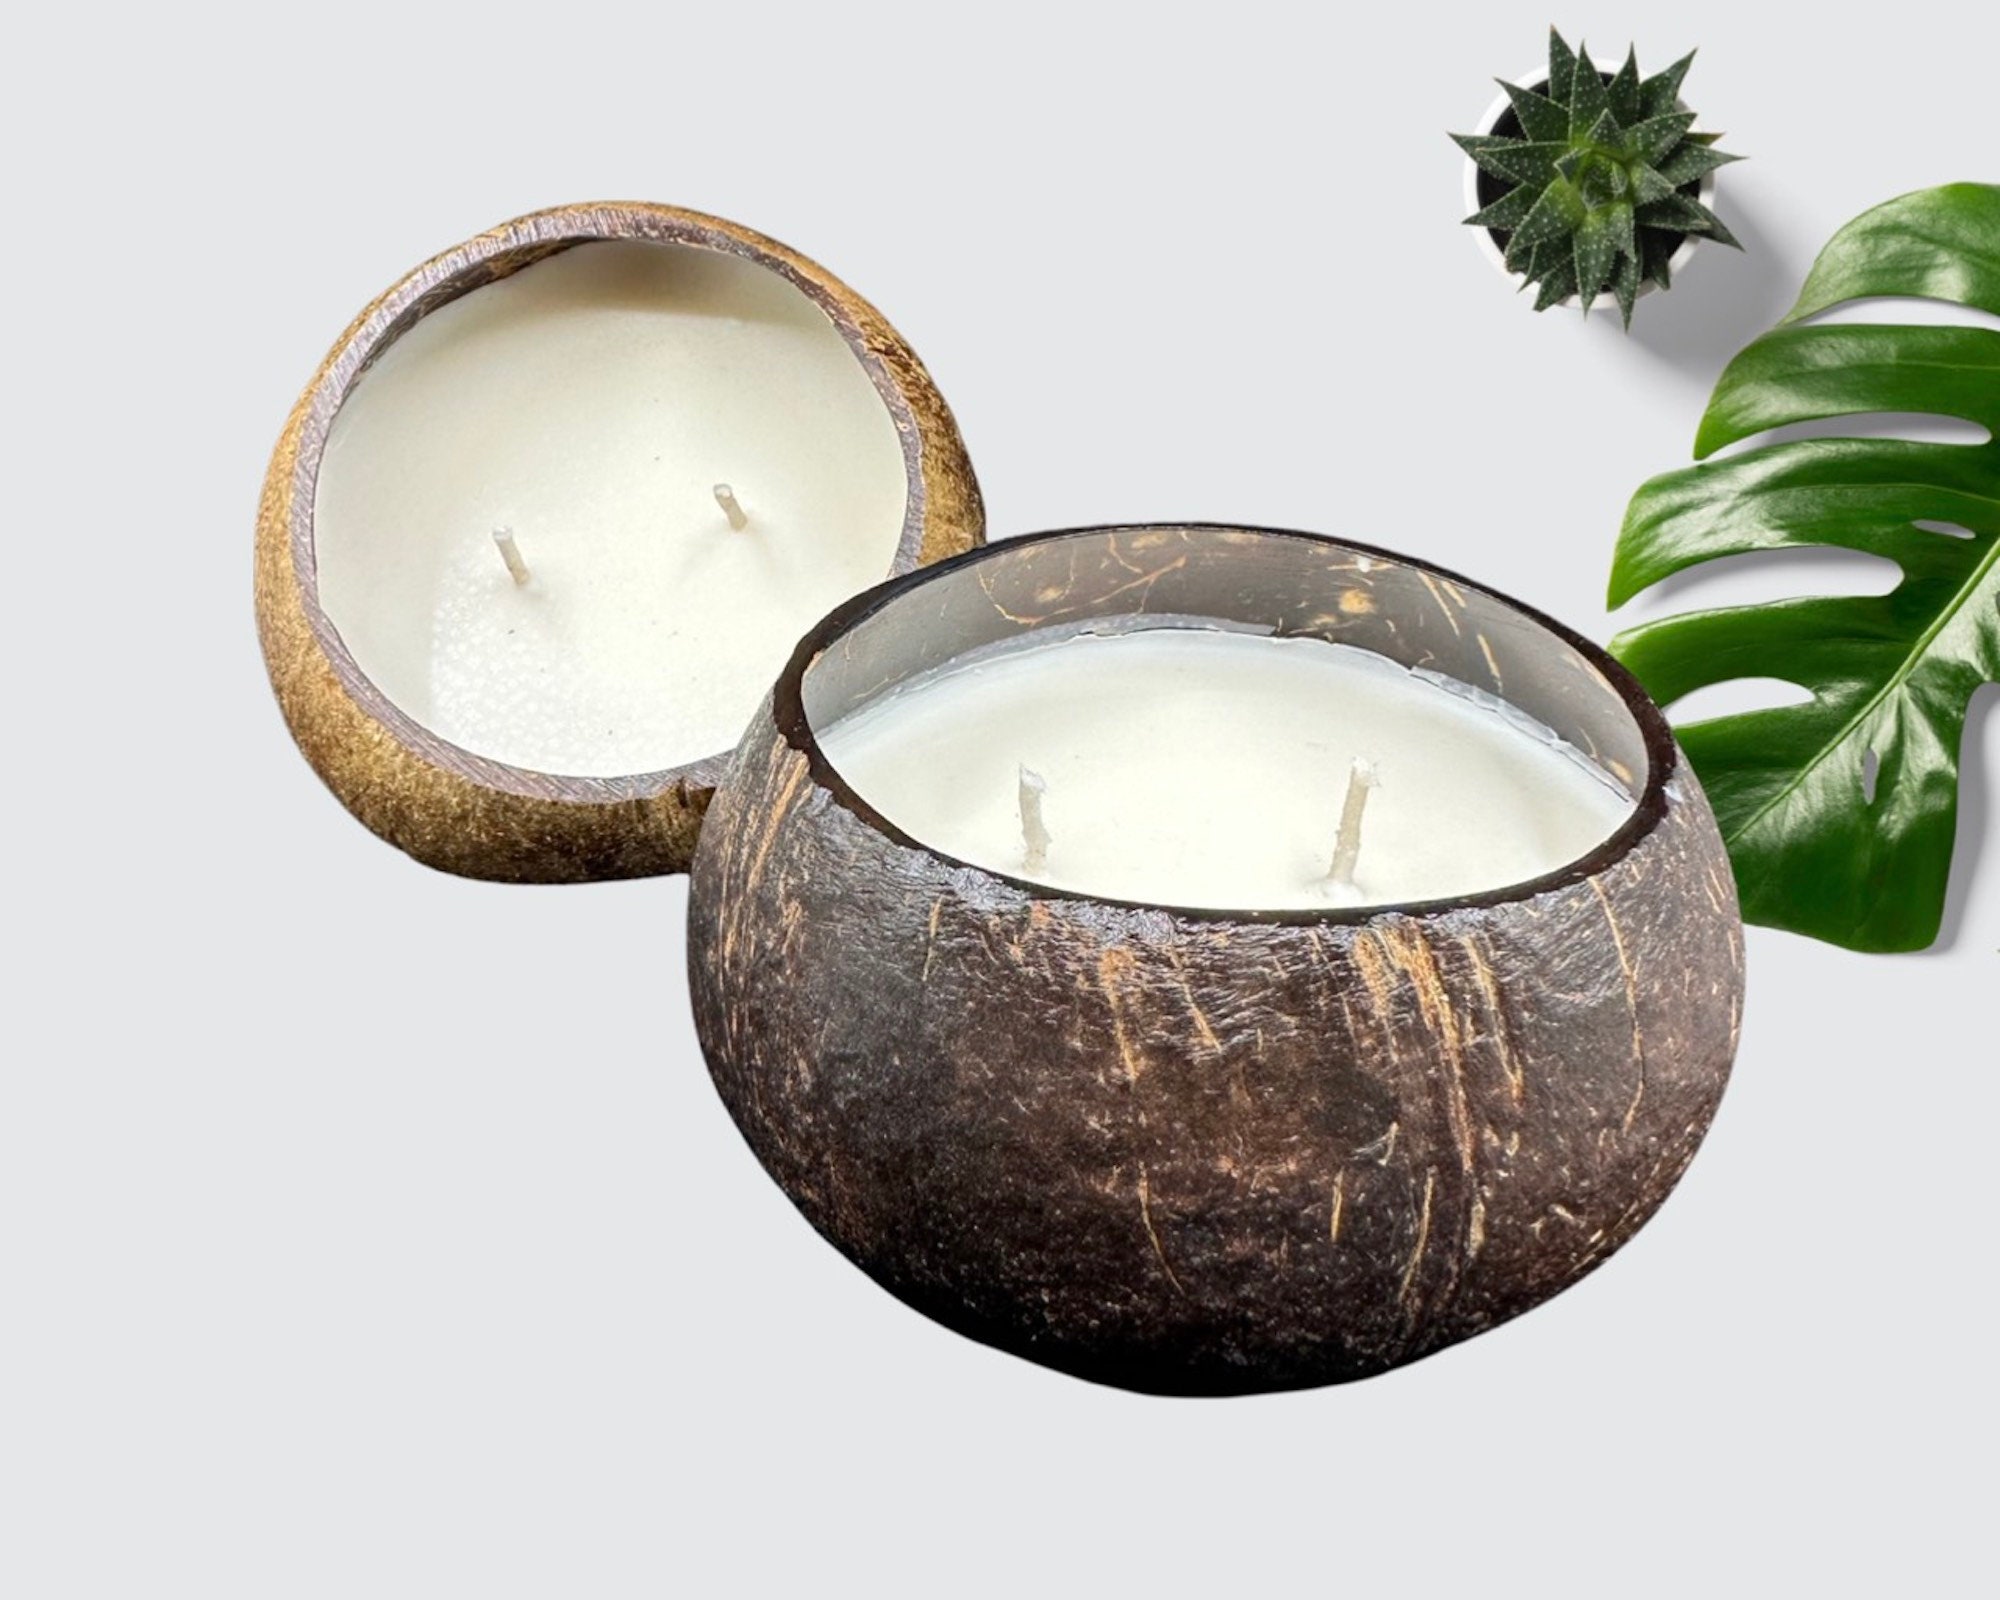 Coconut Soy Wax Blend Candle Making - 10 & 20 lb. Tropical Creamy Blend for  High Load